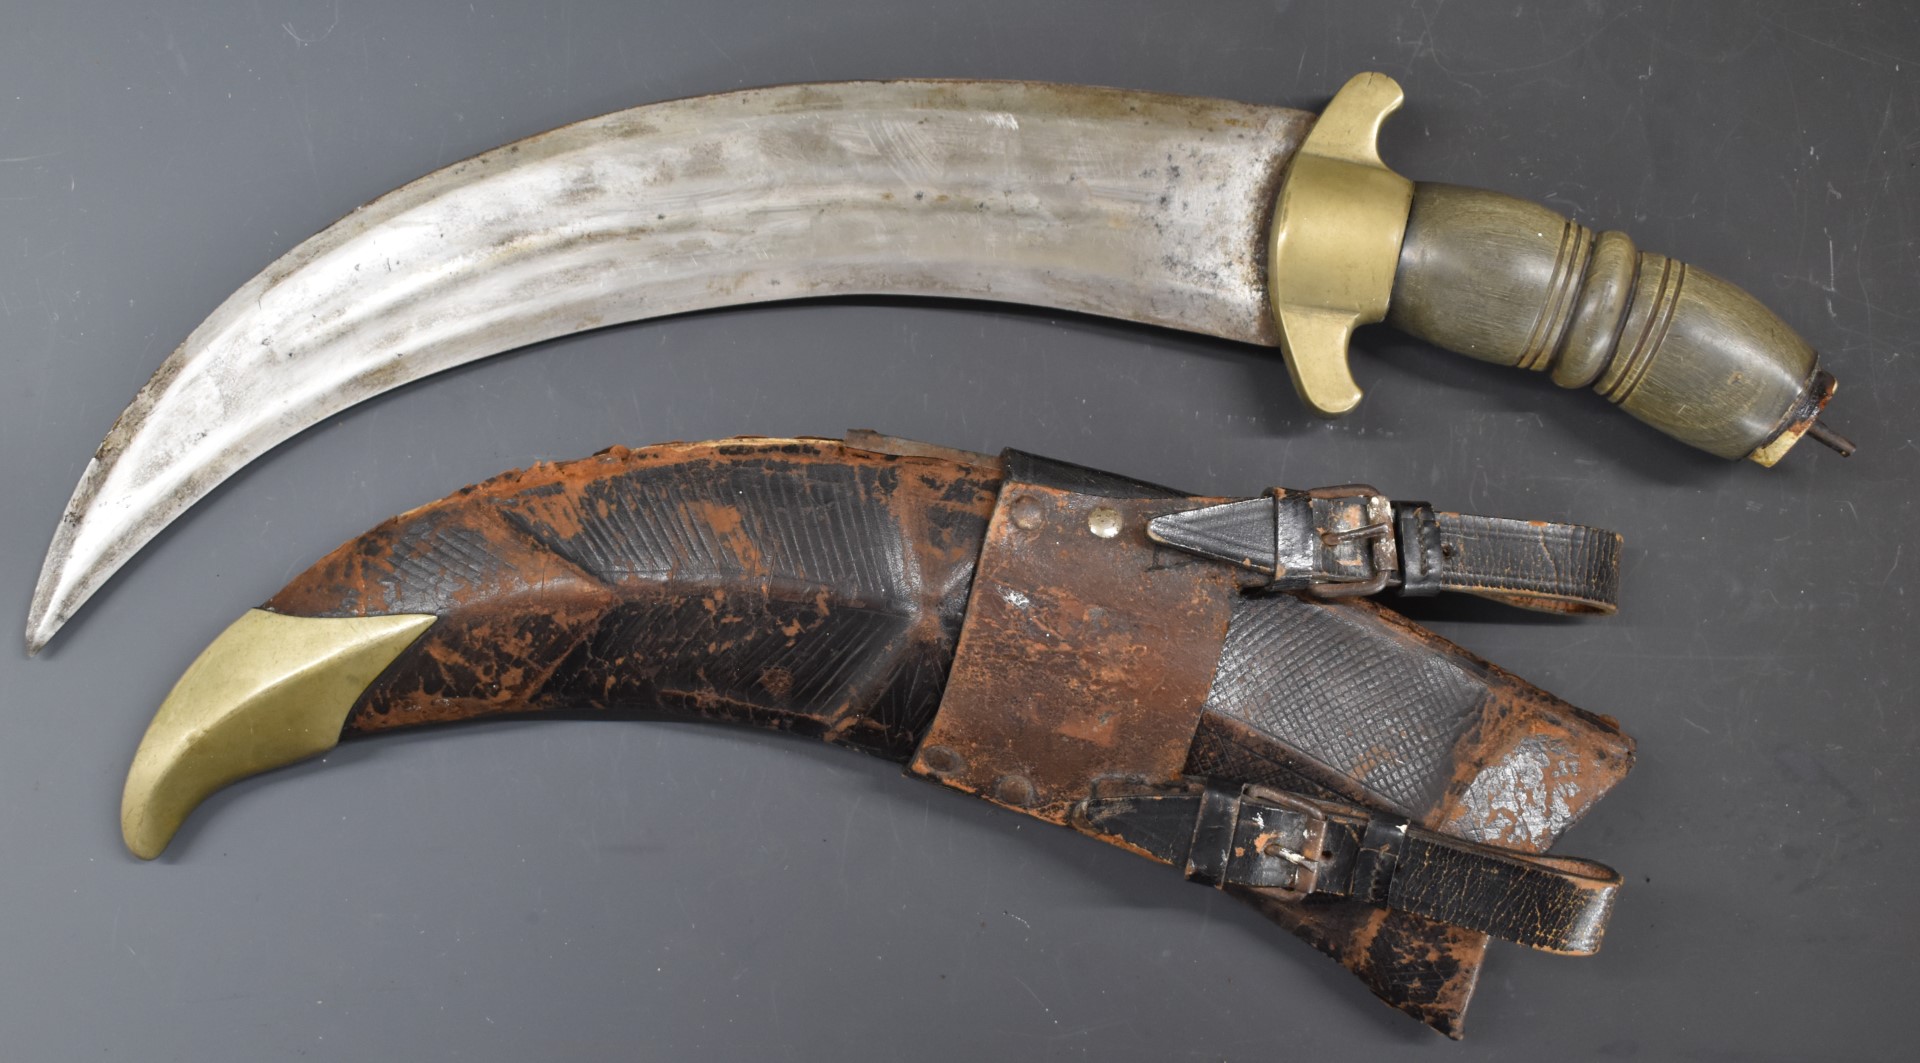 Khanjar style dagger with 32cm double edged blade and sheath - Image 2 of 5